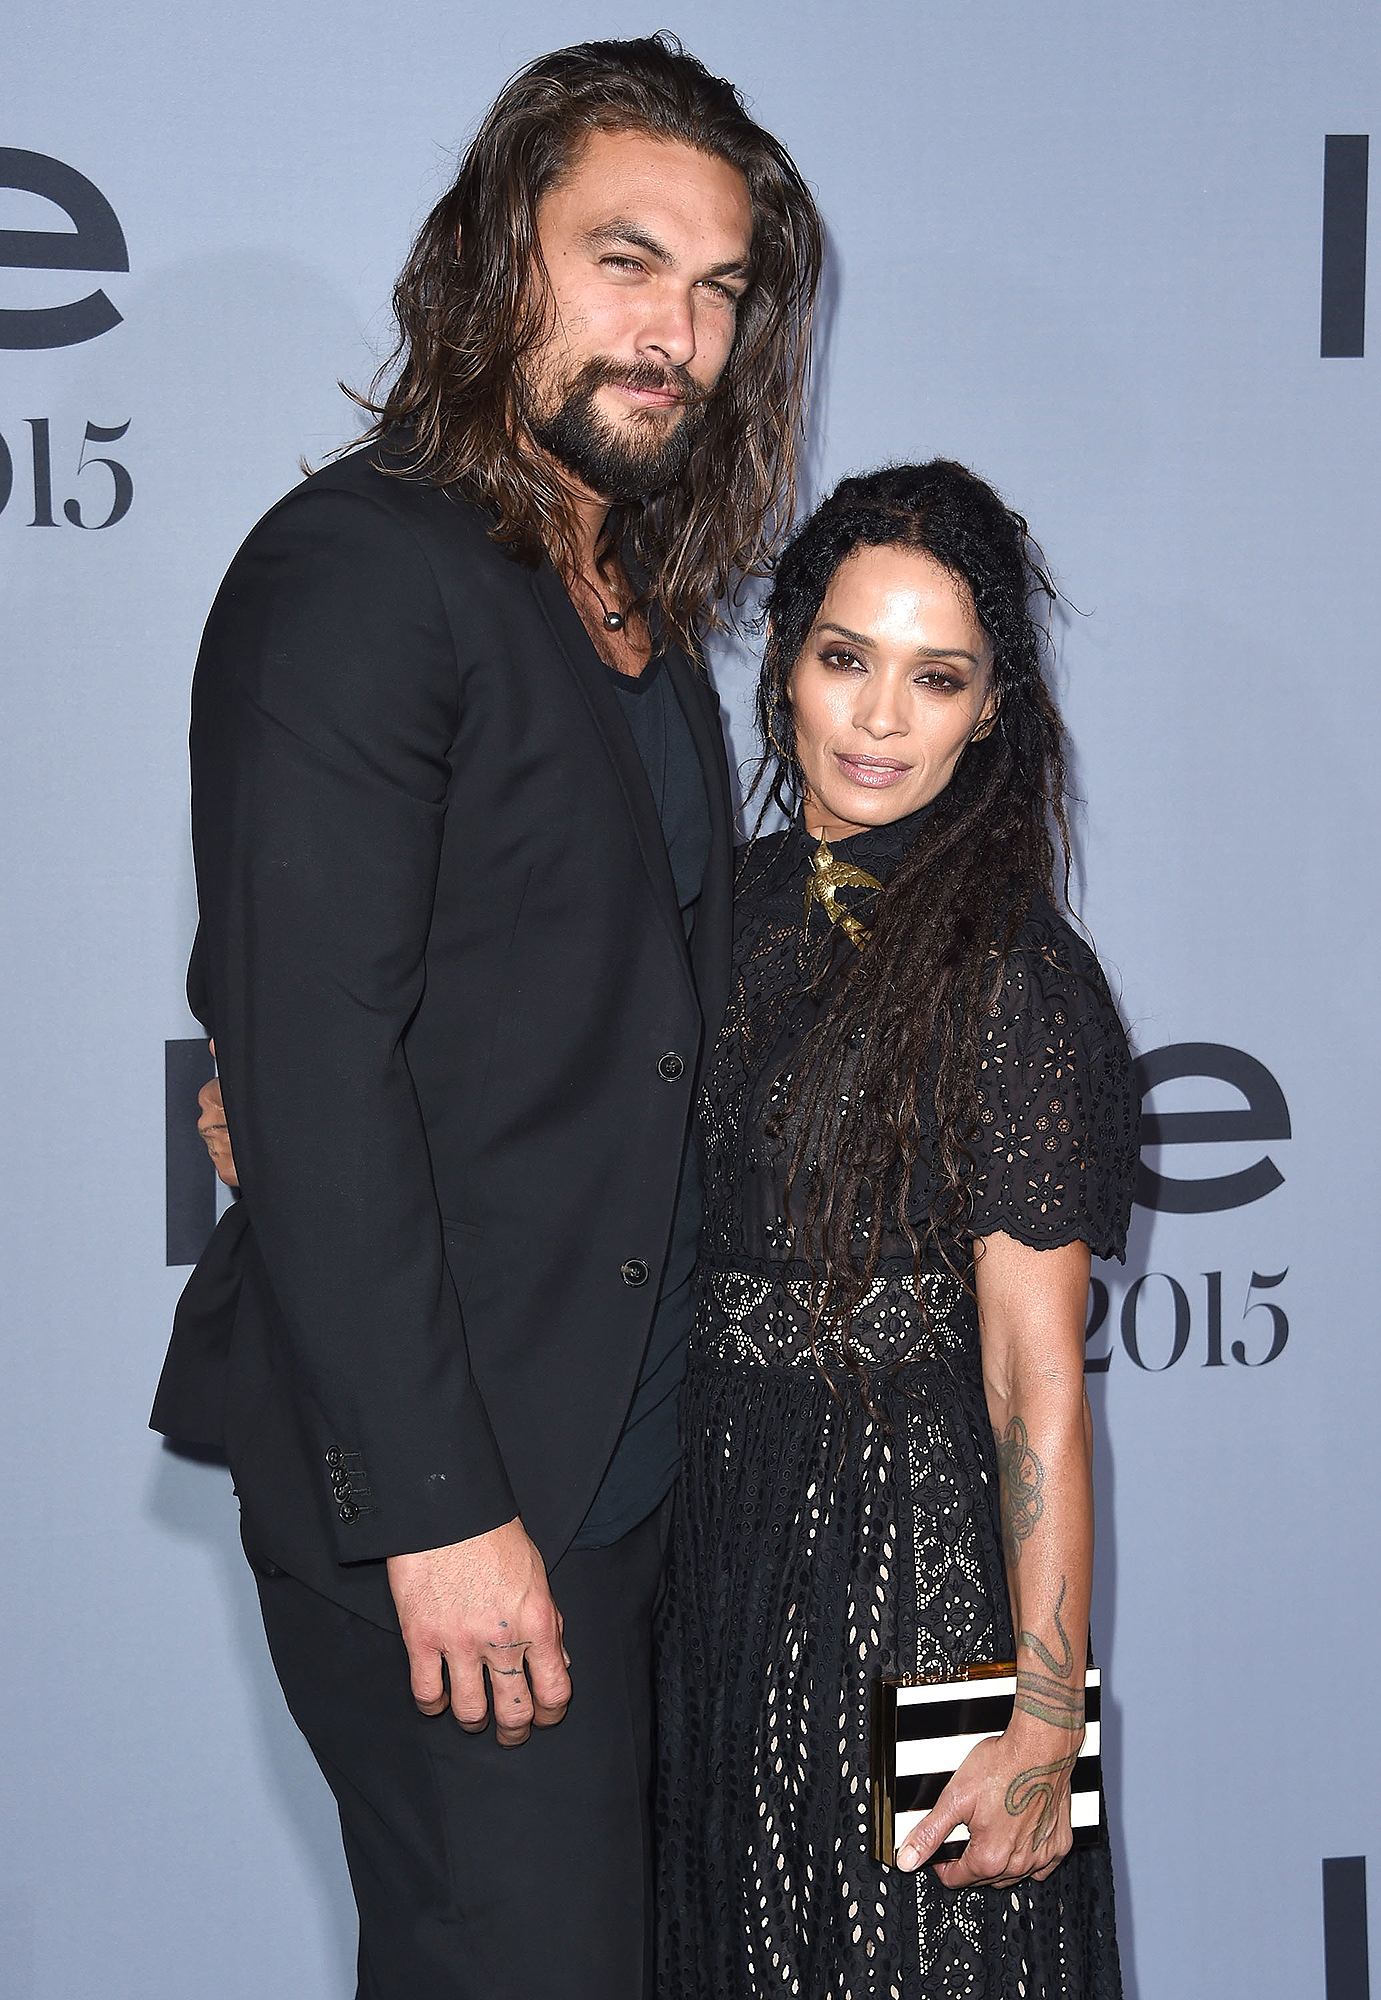 Its Official! Jason Momoa And Lisa Marry In Secret Ceremony